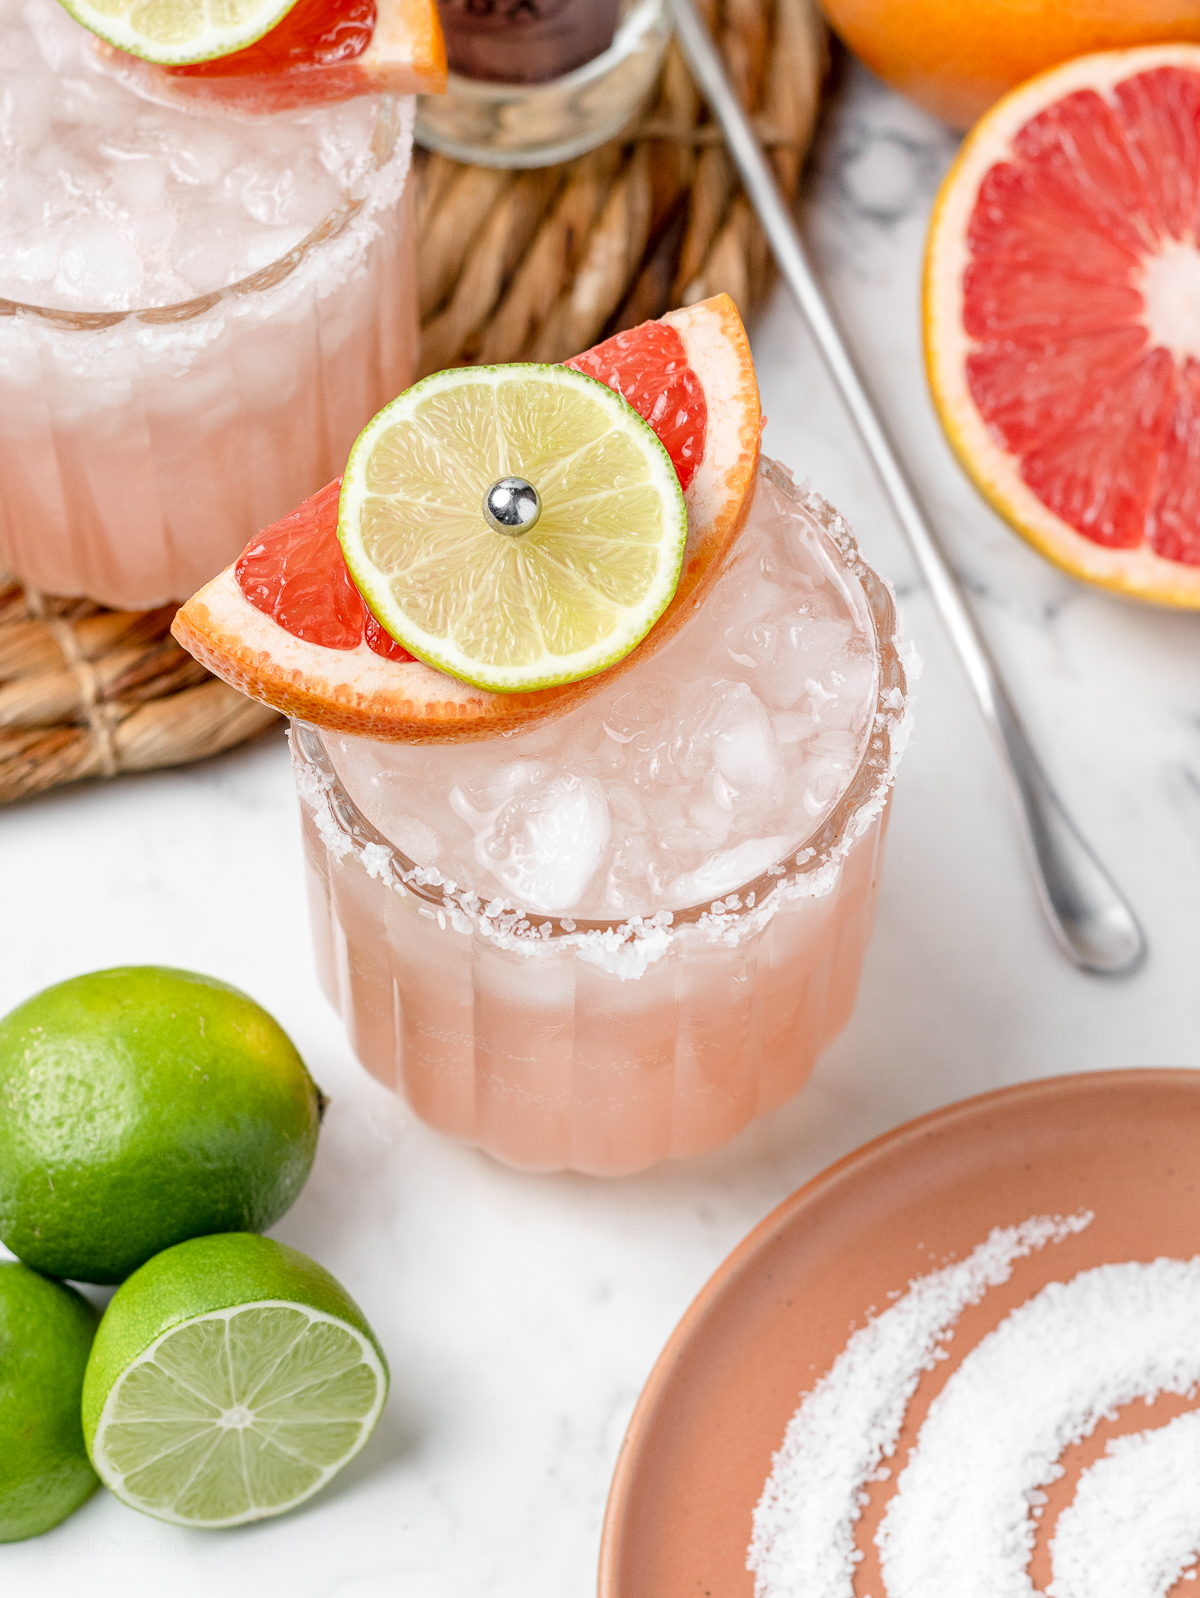 Two Paloma Mocktails with grapefruit and limes around them. There is also a plate of salt for the rim of the glass and a long handled stirrer.